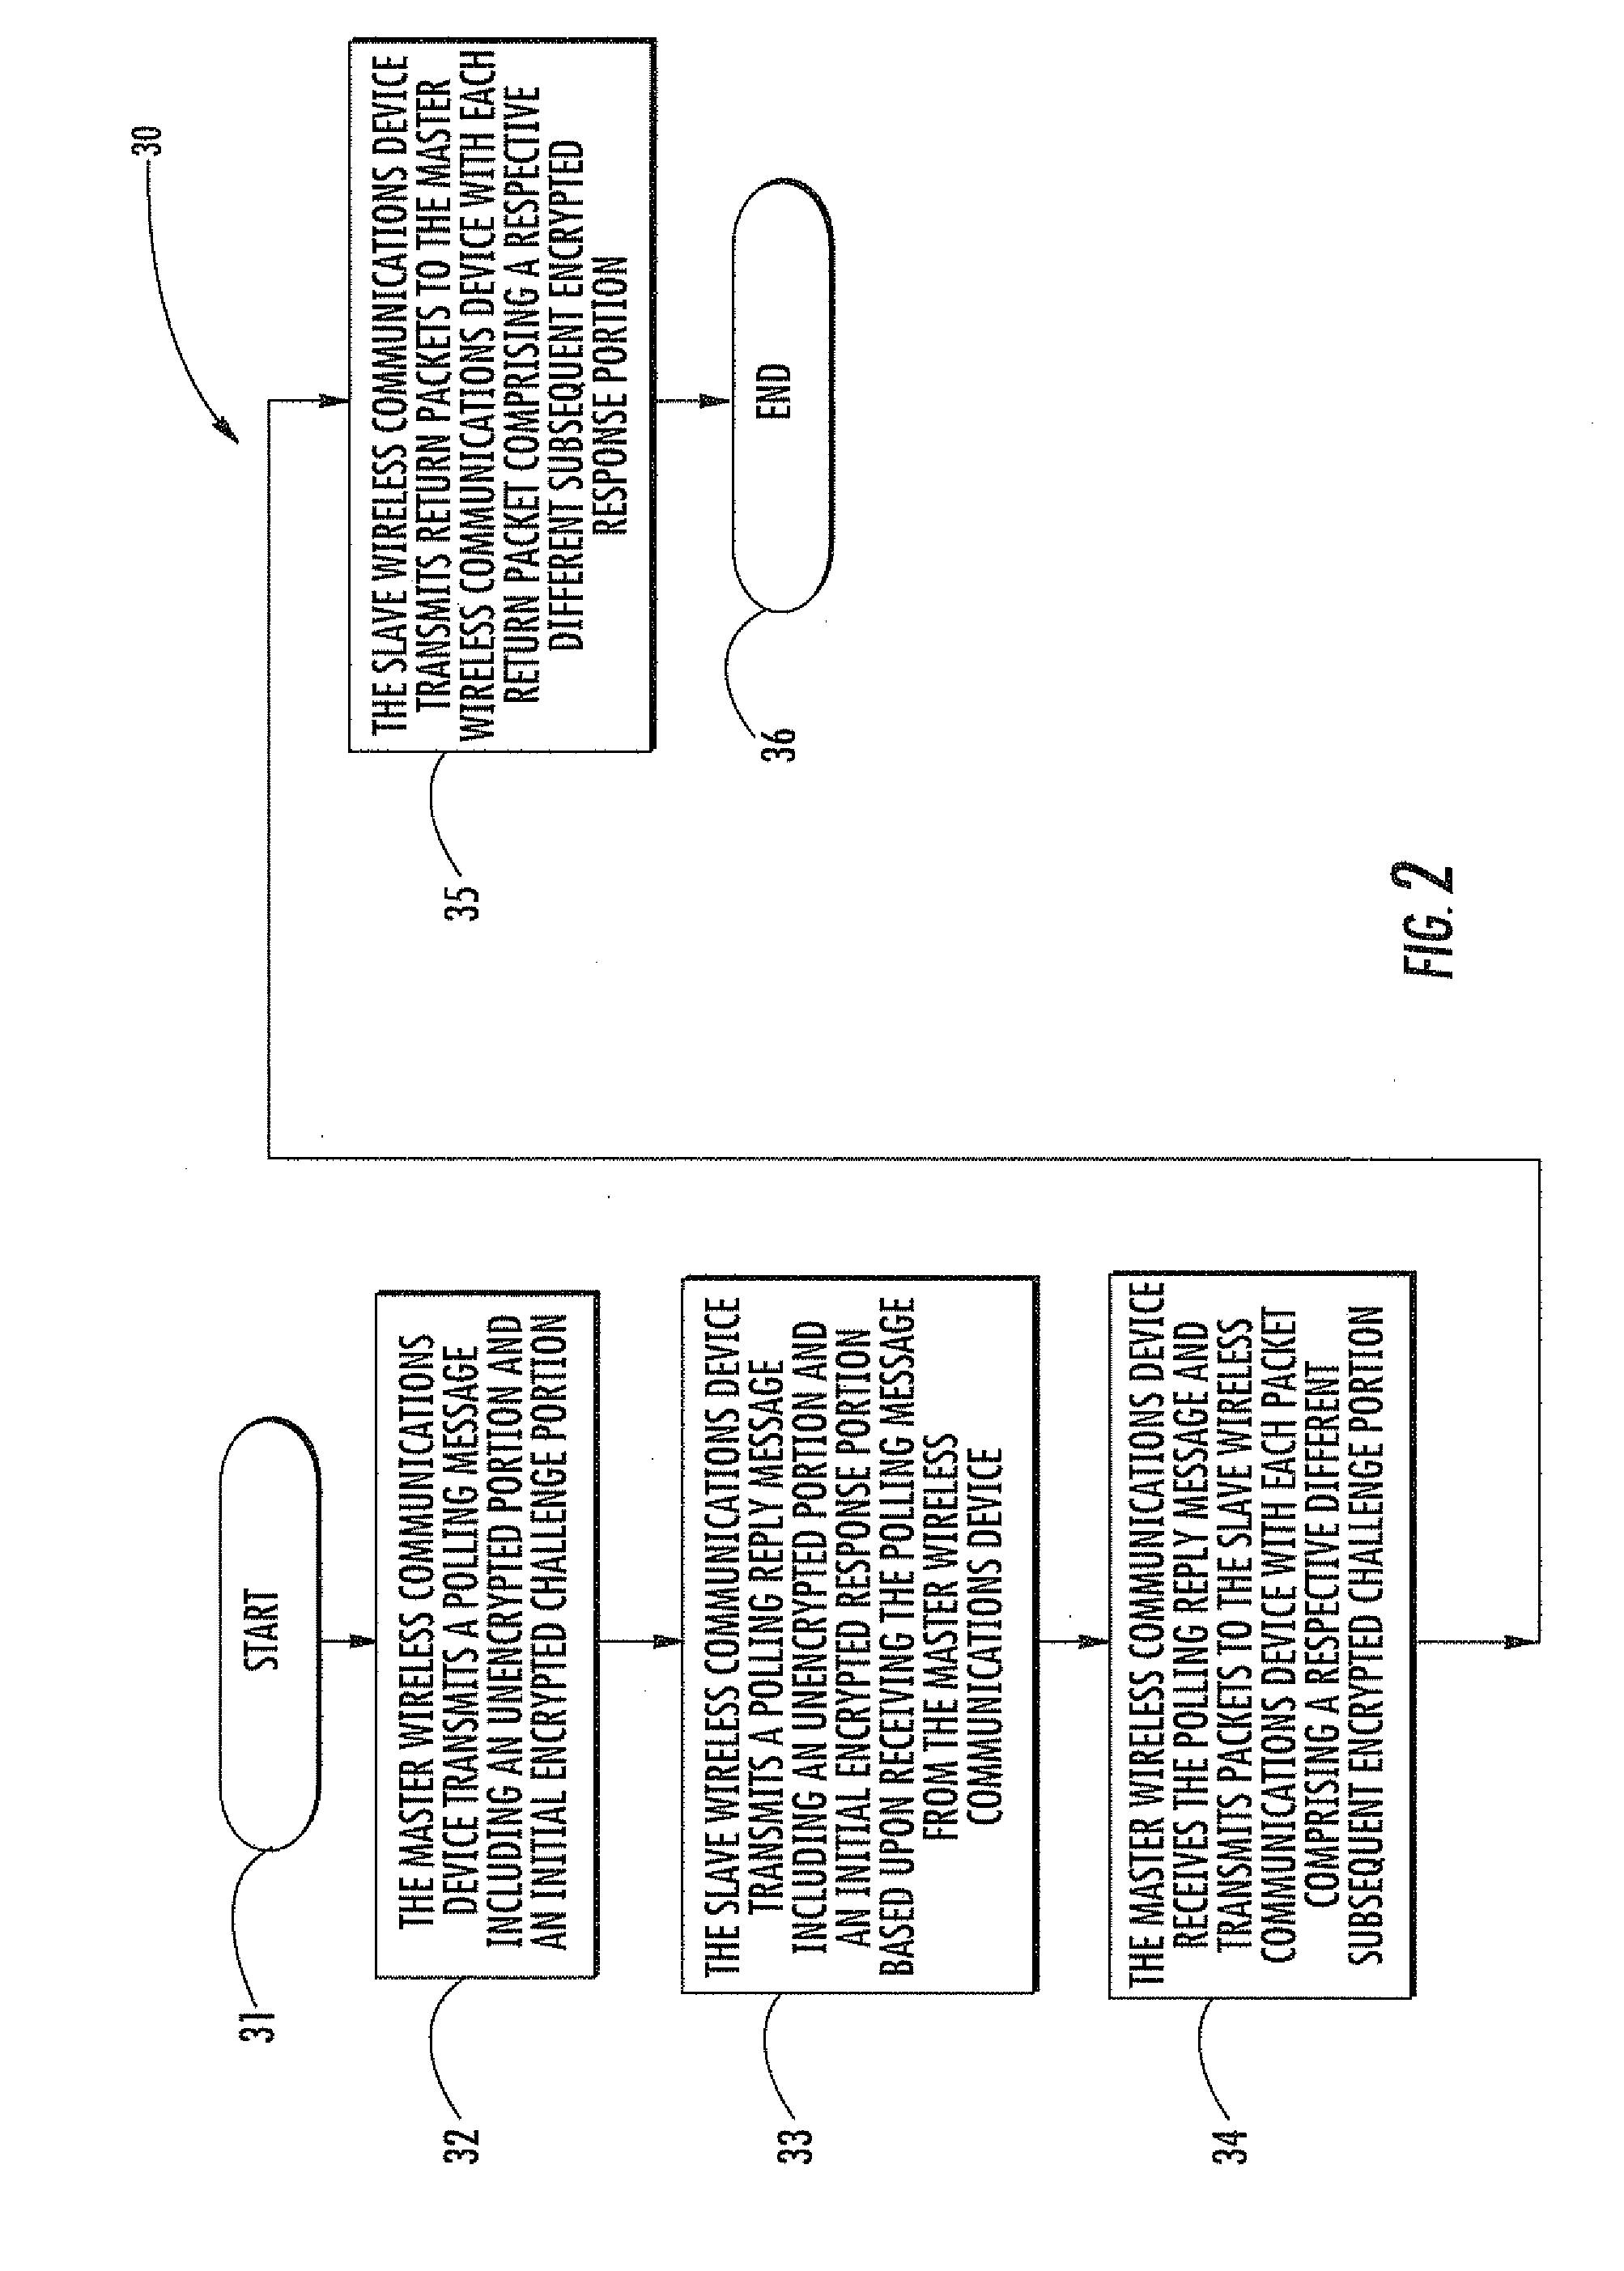 Secure wireless communications system and related method